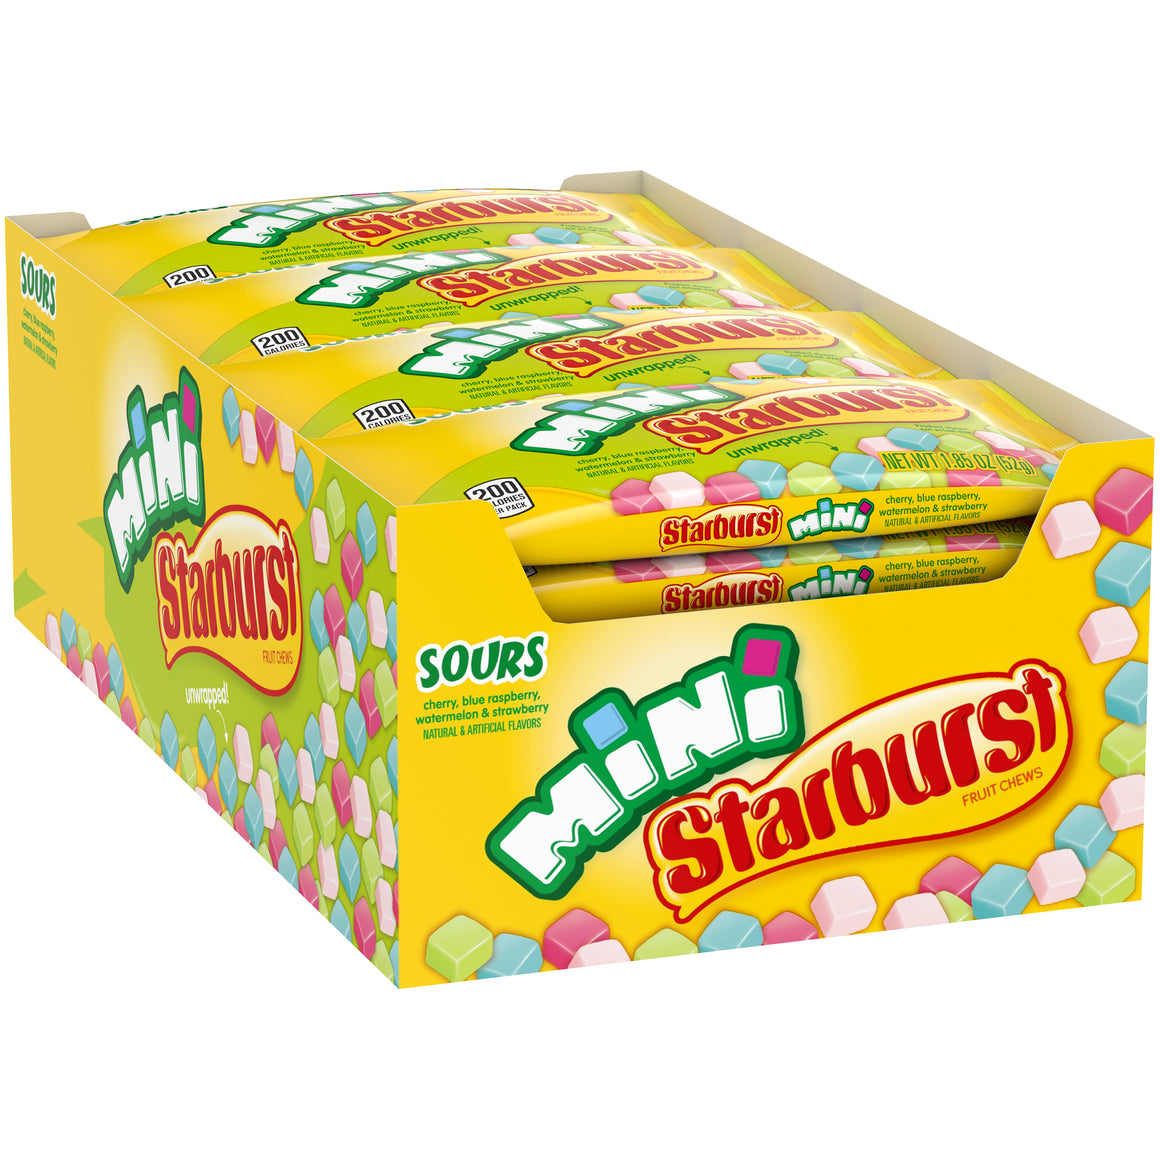 All City Candy Starburst Sours Unwrapped Minis Fruit Chews - 1.85-oz. Bag 1 Pouch Chewy Wrigley For fresh candy and great service, visit www.allcitycandy.com